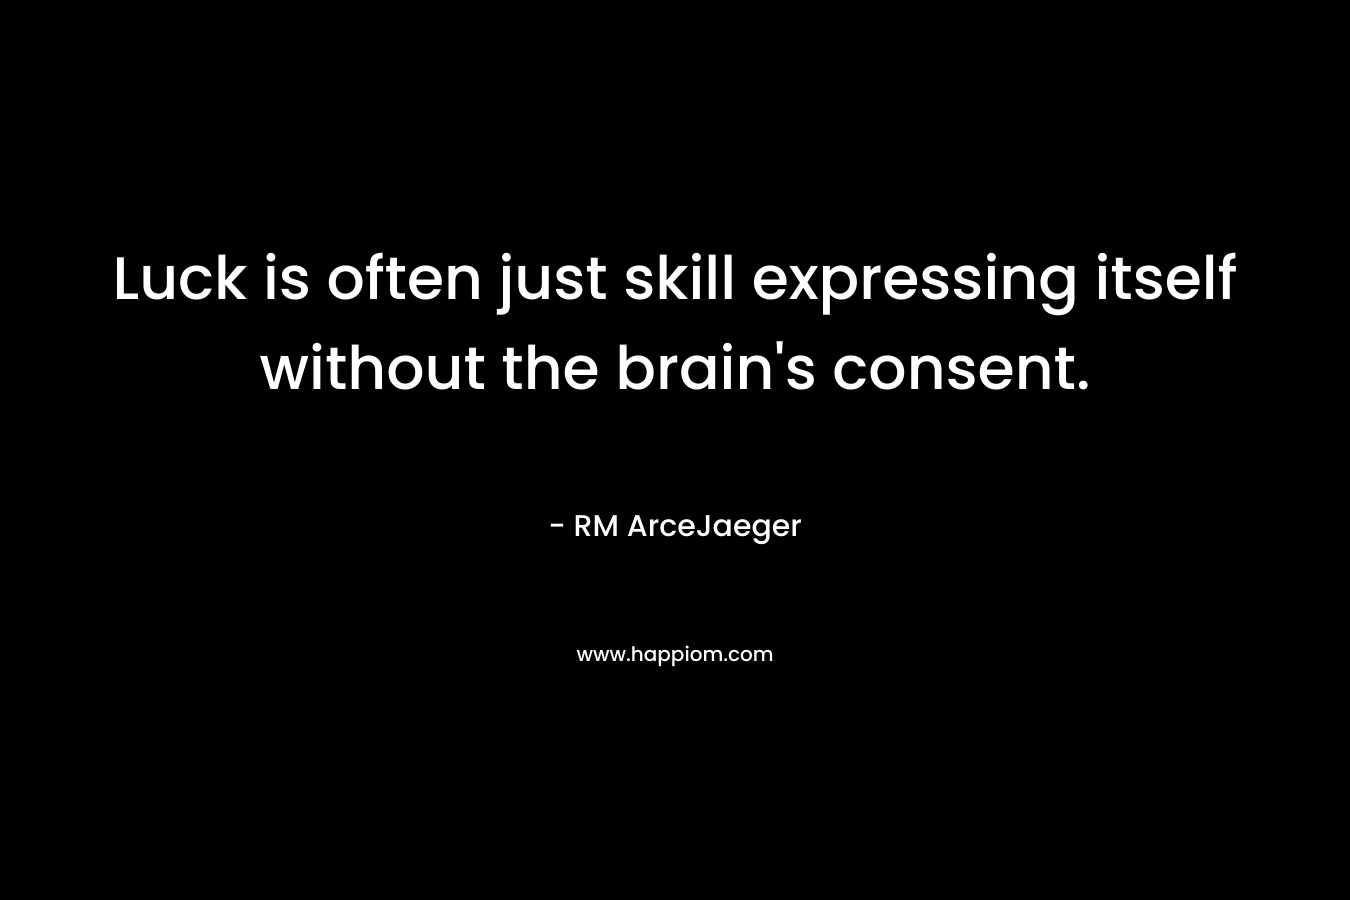 Luck is often just skill expressing itself without the brain’s consent. – RM ArceJaeger